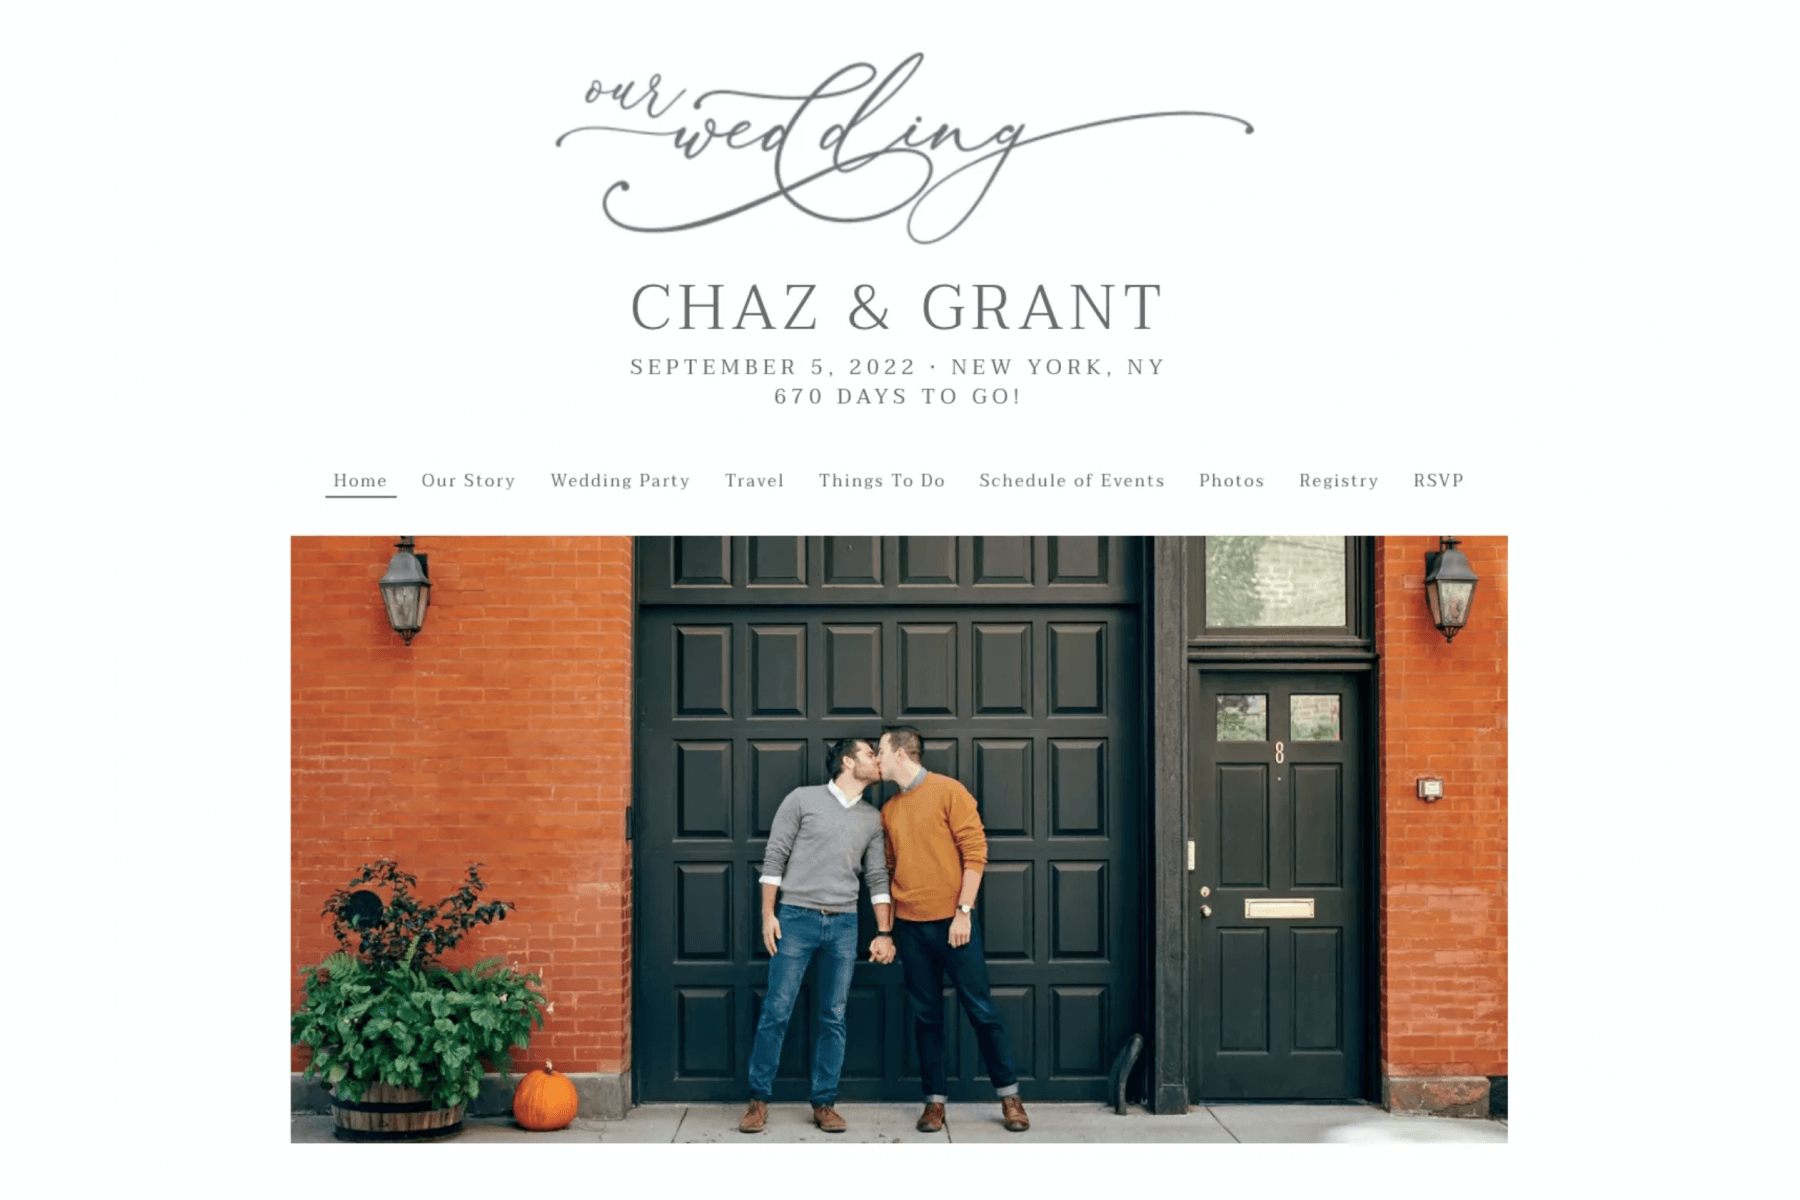 A screenshot of a wedding website shows a photo of two men kissing in front of a brick building and black garage door below the words “Our Wedding” followed by “Chaz & Grant.”